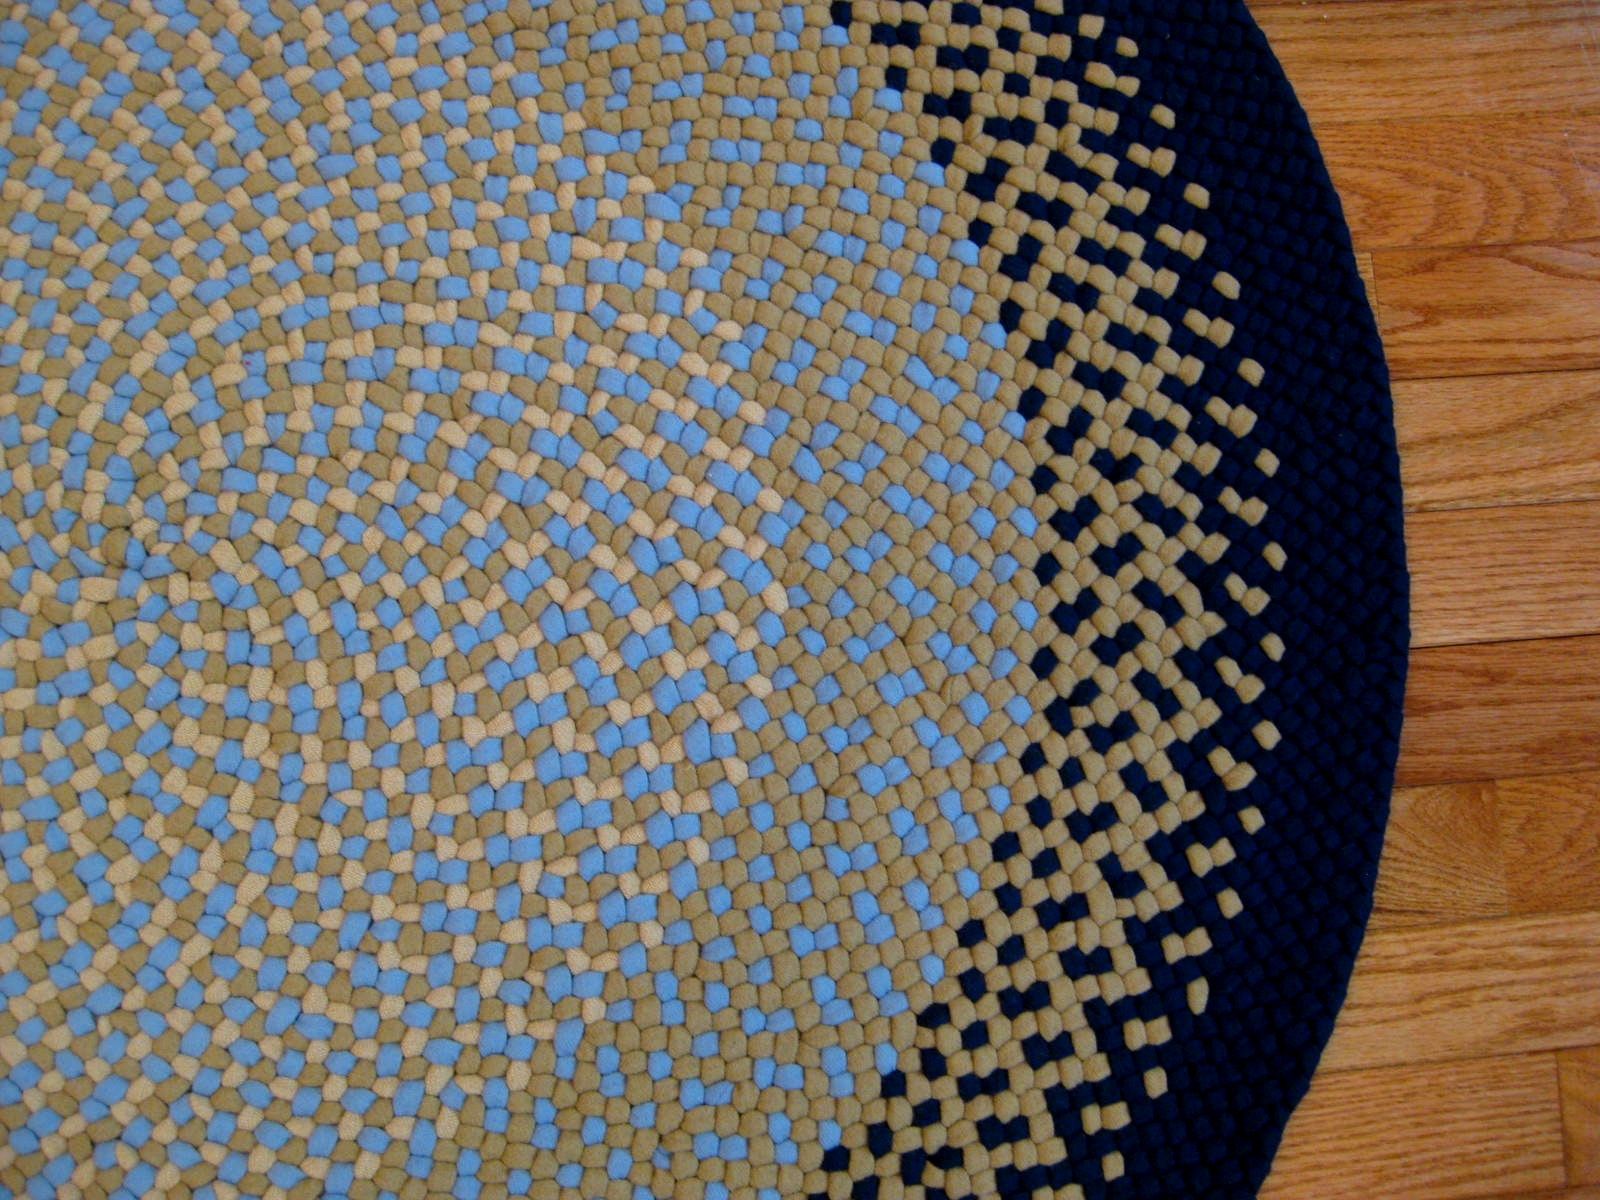 Round Wool Braided Rugs Roselawnlutheran Inside Braided Wool Area Rugs (View 12 of 15)